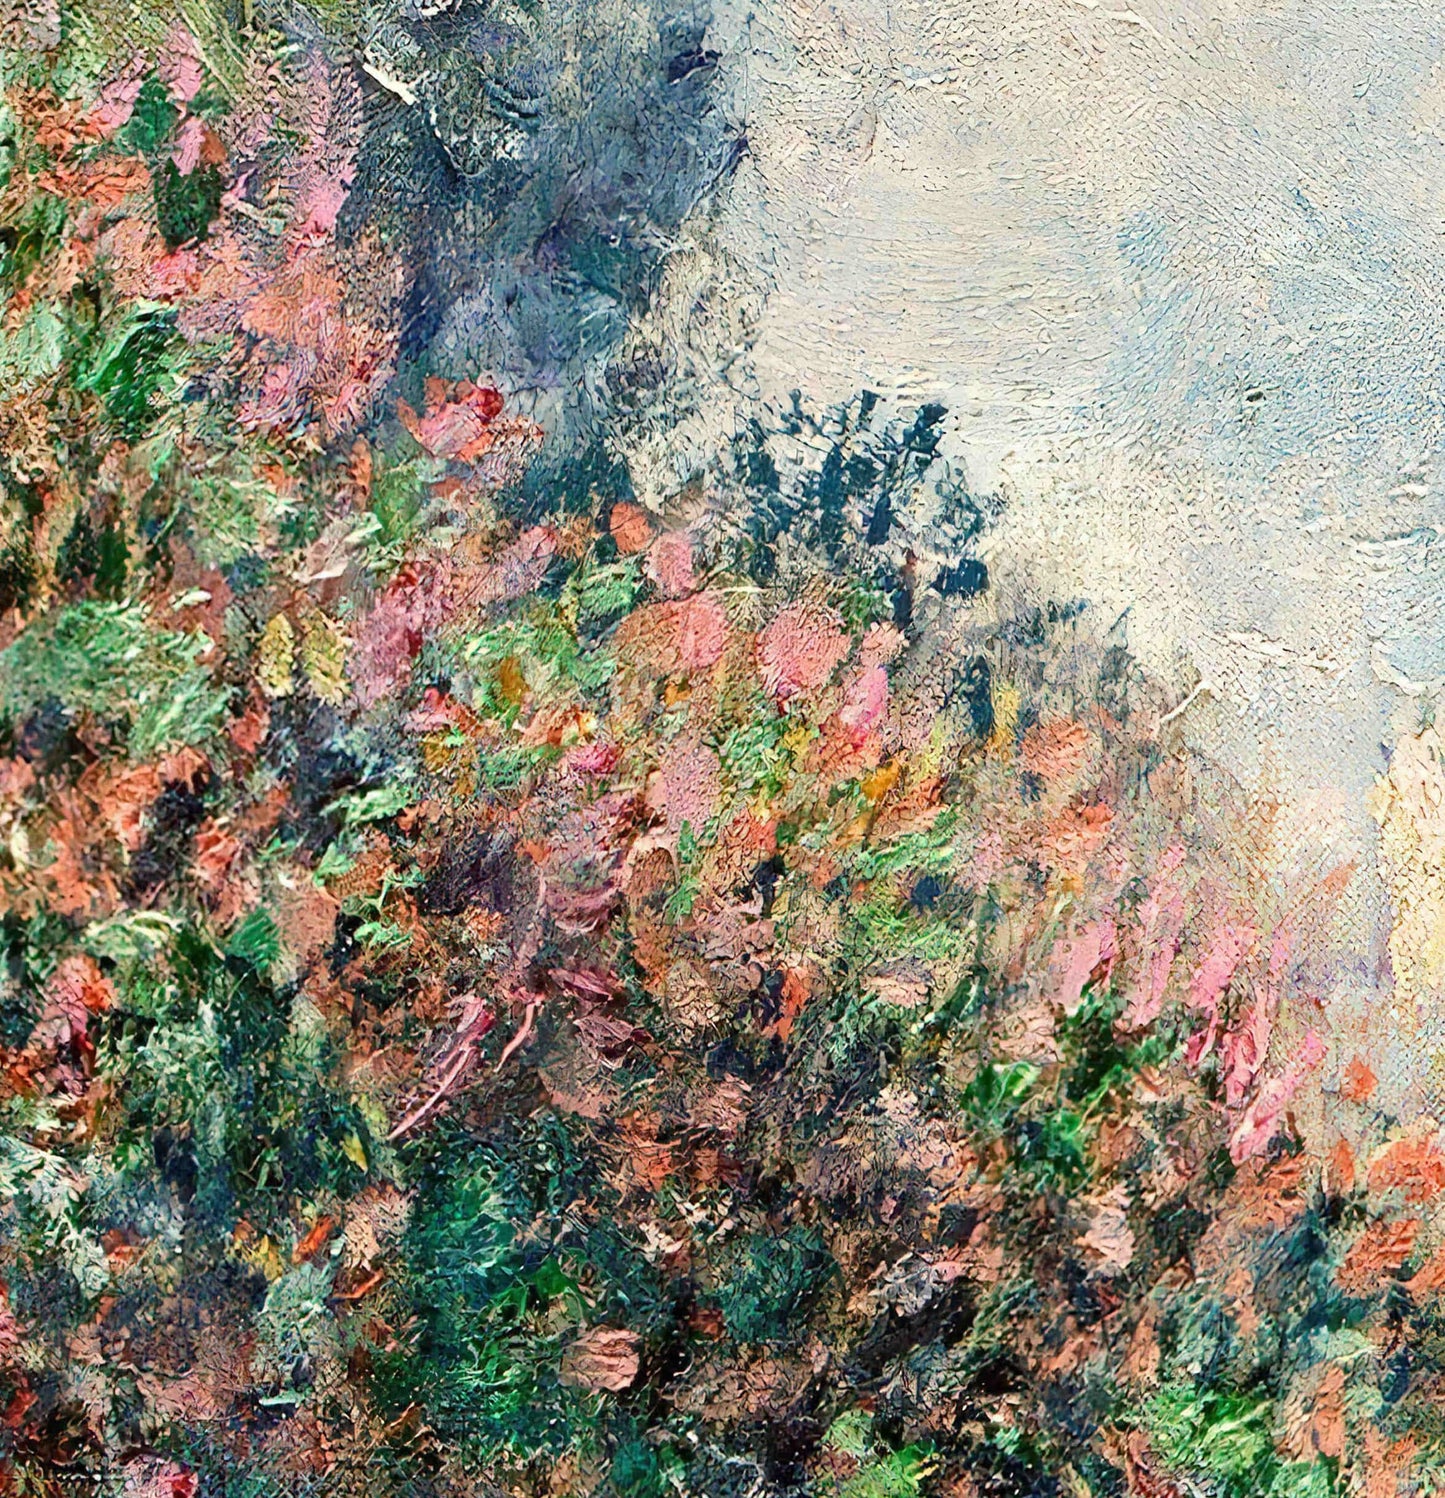 Landspace the Parc Monceau by Claude Monet, 3d Printed with texture and brush strokes looks like original oil-painting, code:018